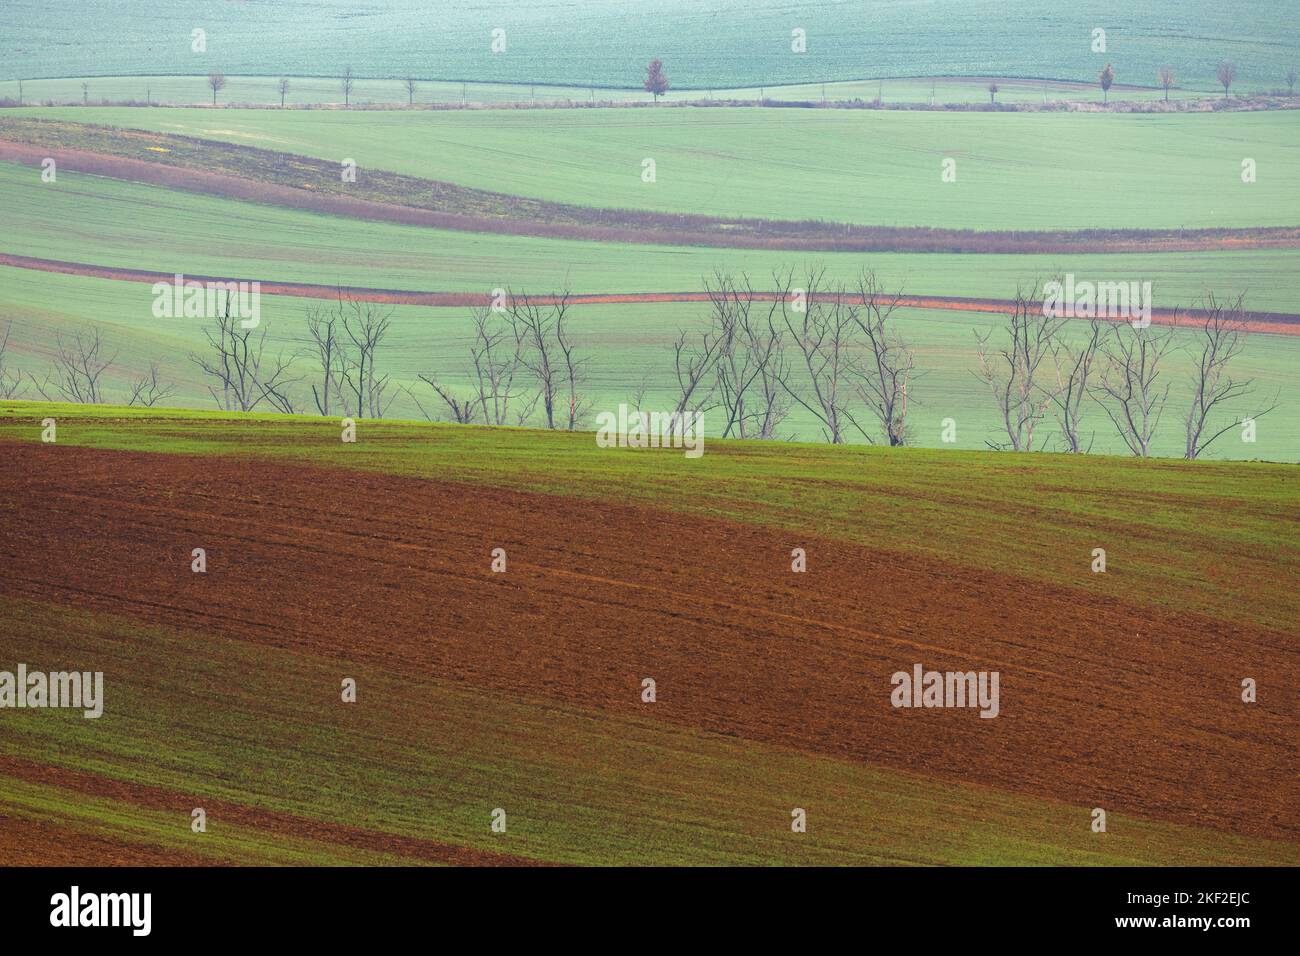 Layers and patterns in the agricultural soil in the rolling hills and rural countryside farmland of the Hodonin District in South Moravia, Czech Repub Stock Photo